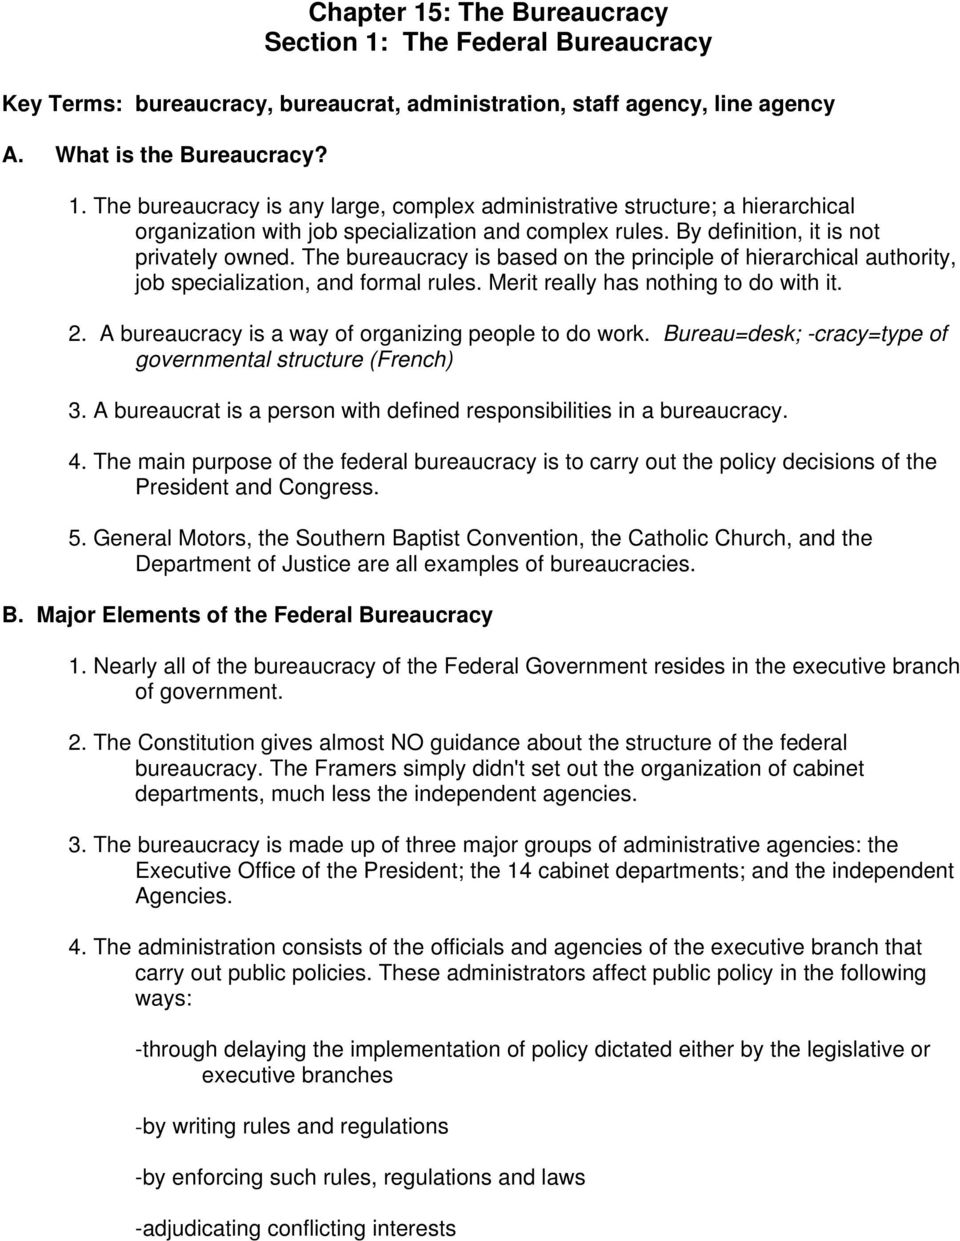 Chapter 15 The Bureaucracy Section 1 The Federal Bureaucracy Pdf Free Download